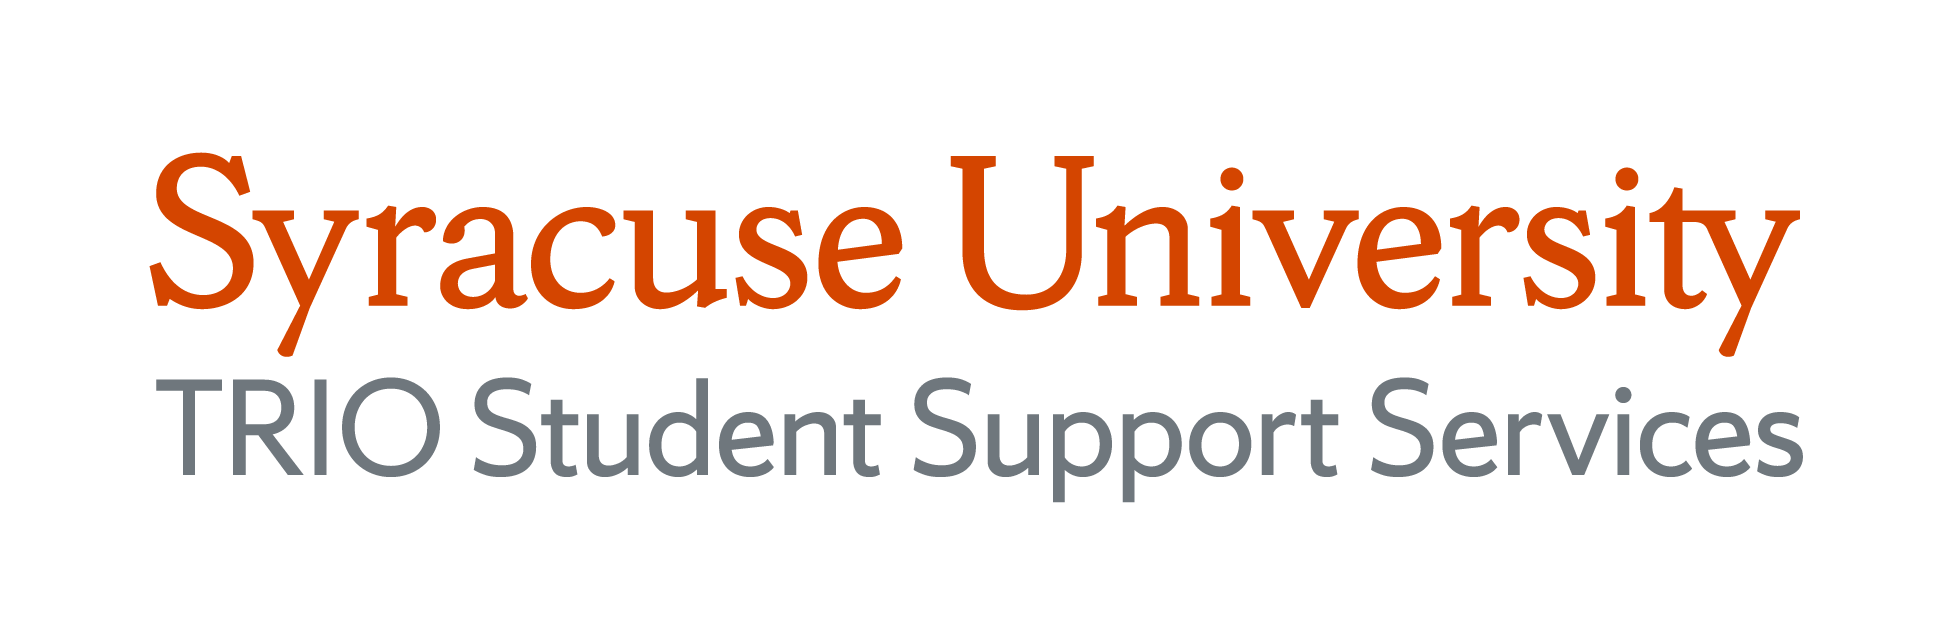 Syracuse University TRIO Student Support Services